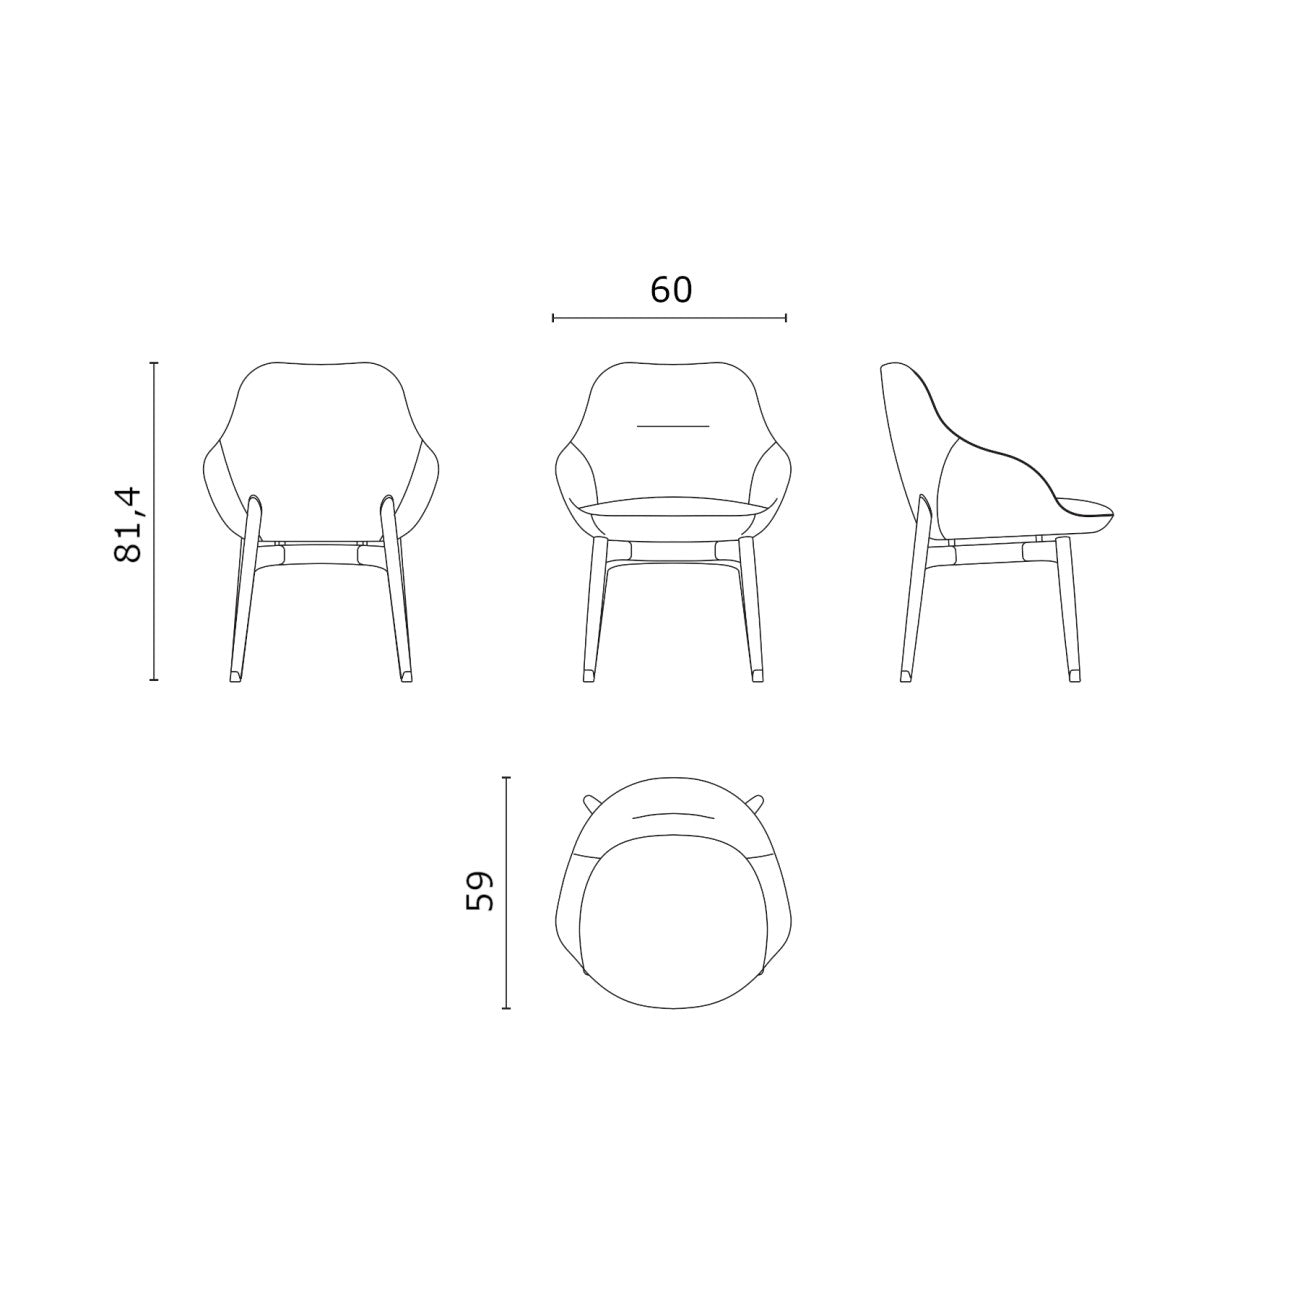 CPRN HOMOOD | Royal Leather and Fabric Dining Chair w. Arms  - $5,478.00